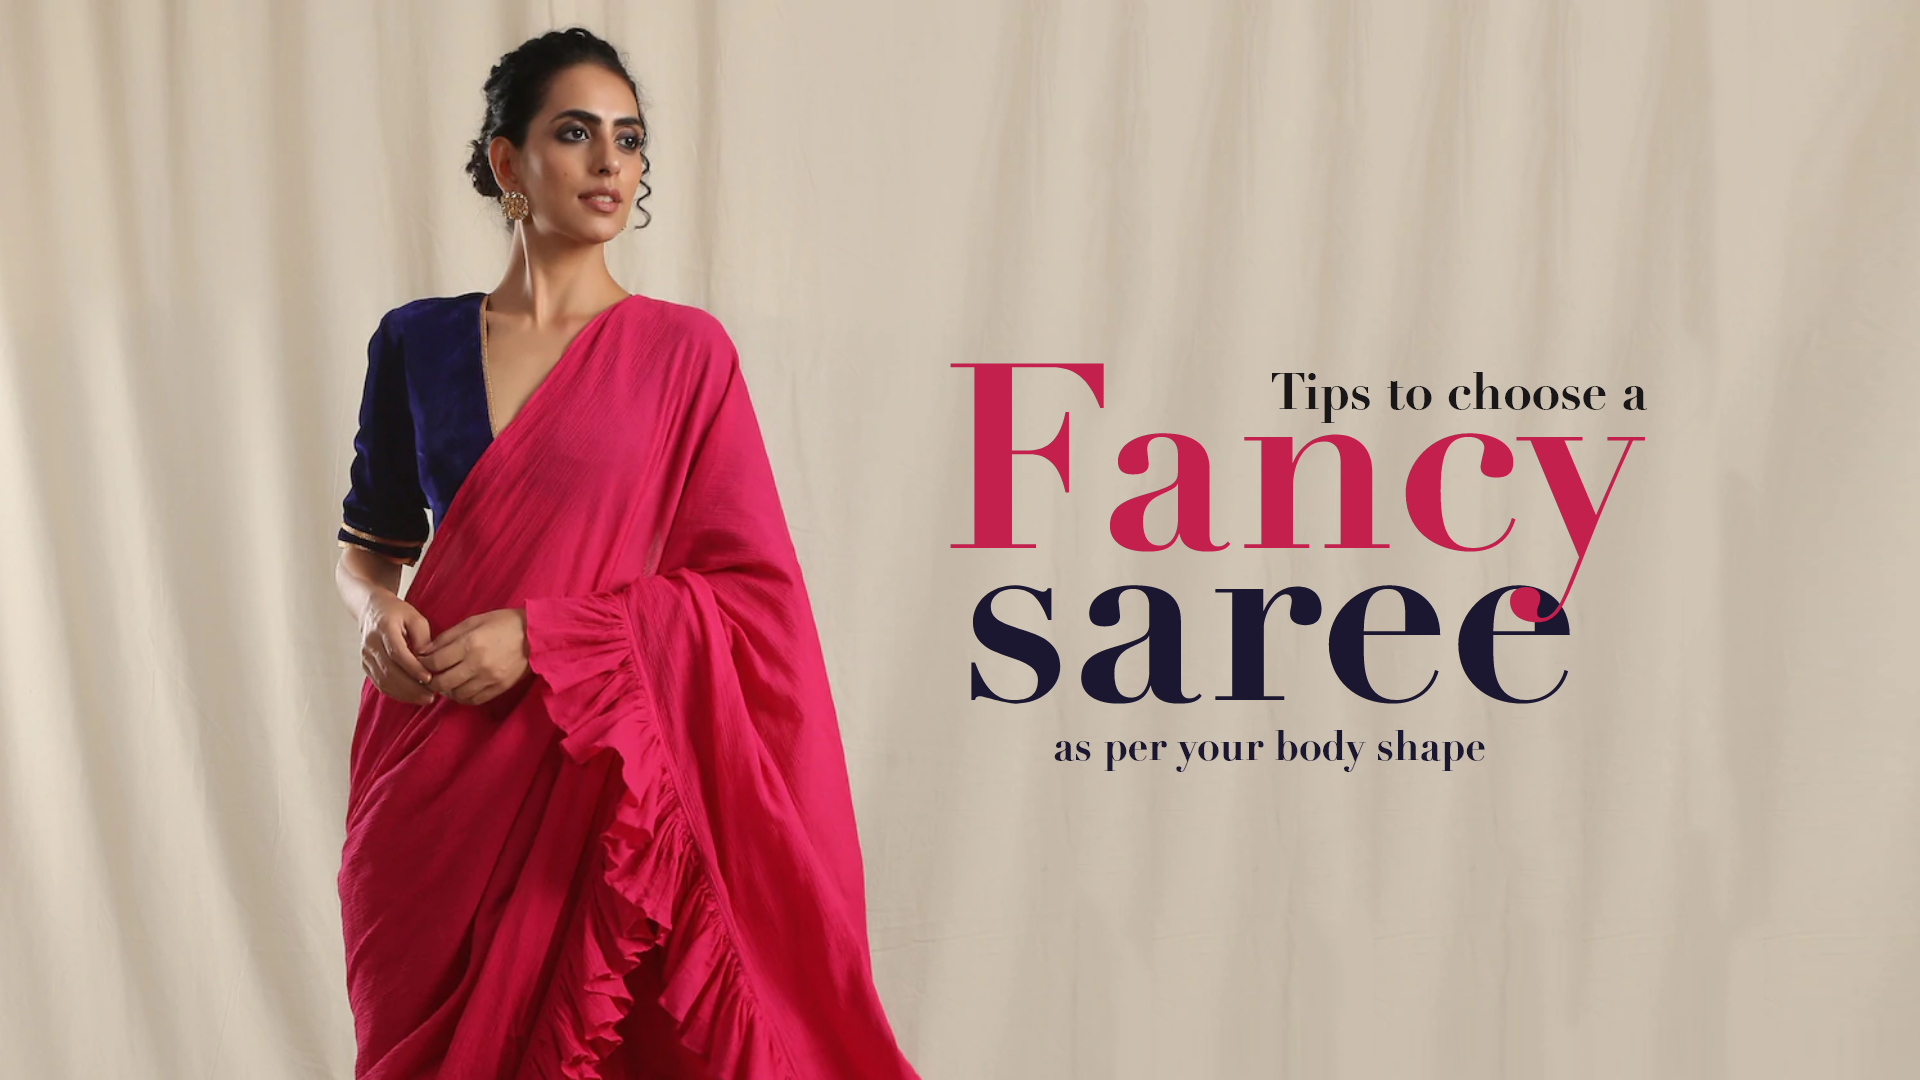 Saree draping tips for skinny girls  How to style a saree for beginners 